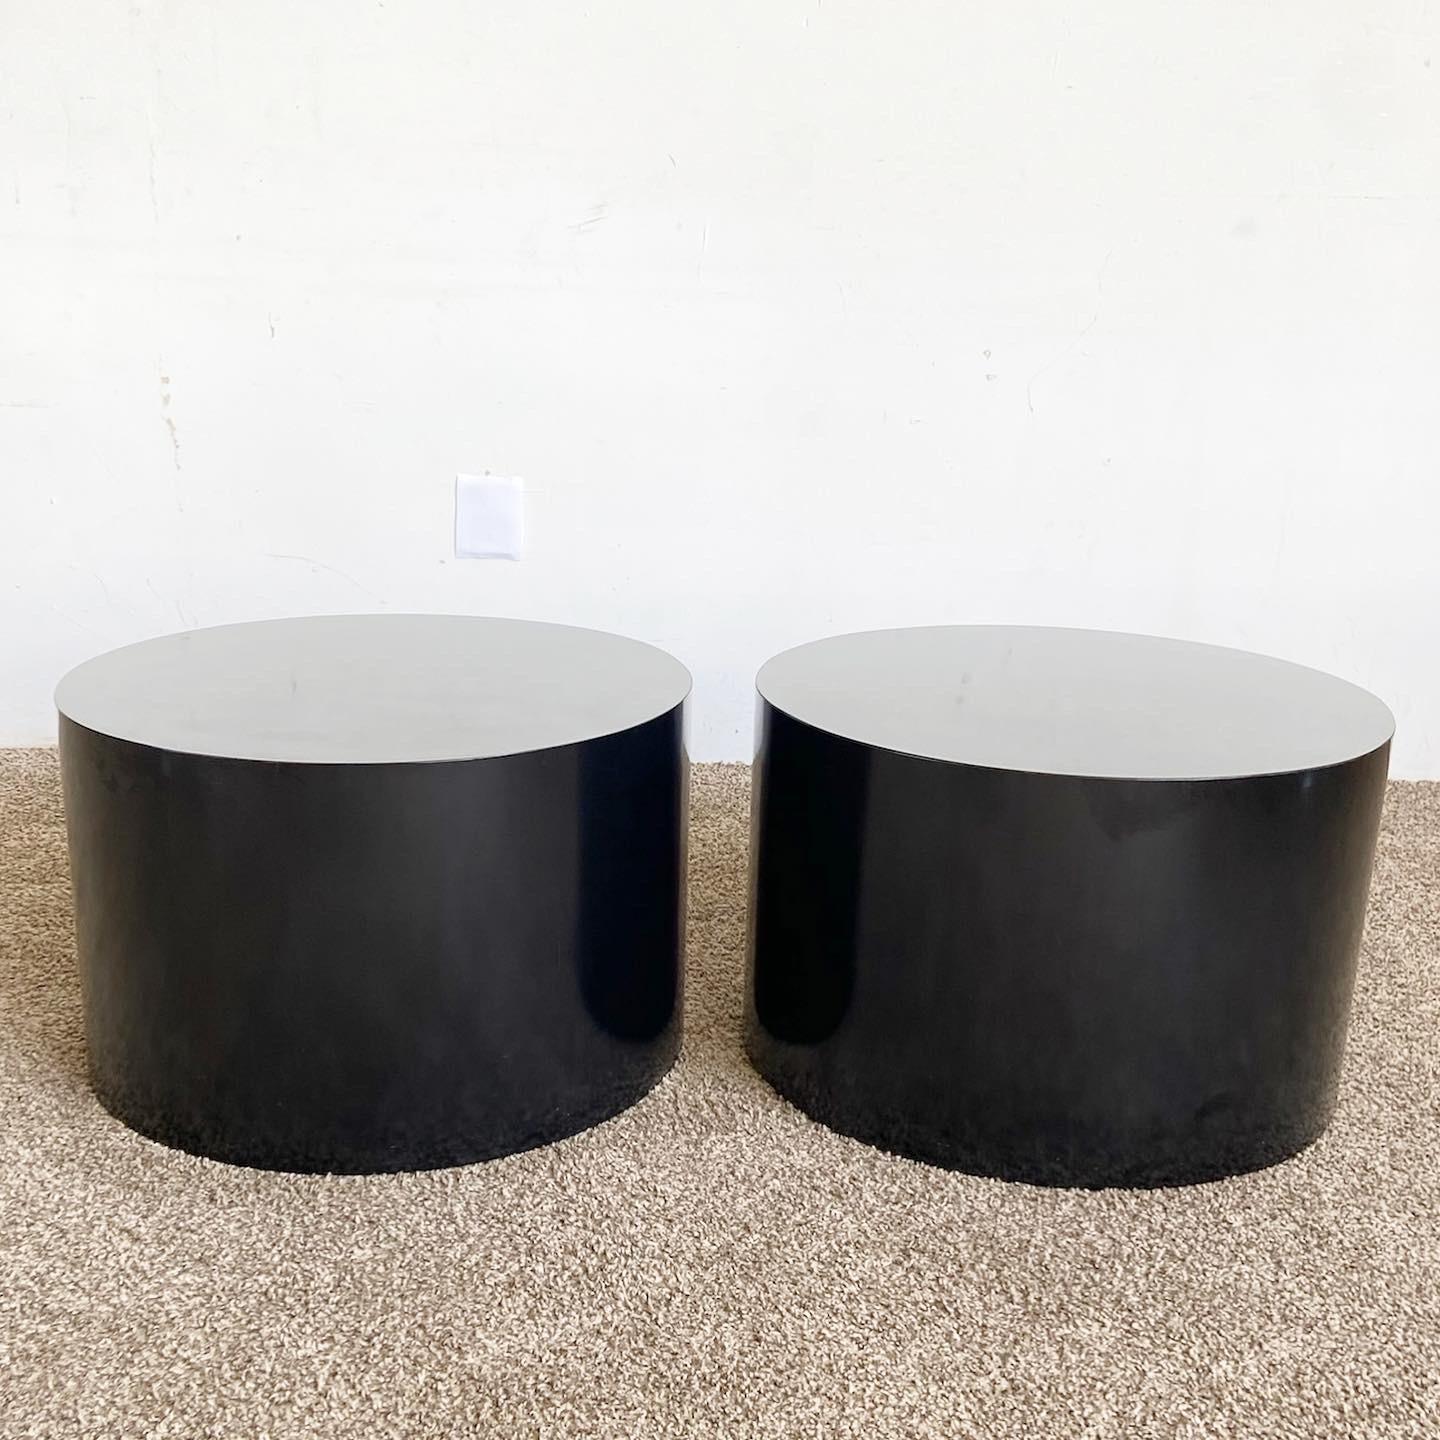 Our Postmodern Black Lacquer Laminate Drum Side Tables are a sleek addition to any home, featuring a high-gloss finish and unique drum shape.

Features a bold, black lacquer laminate finish, offering high-gloss appeal.
Unique drum shape adds an